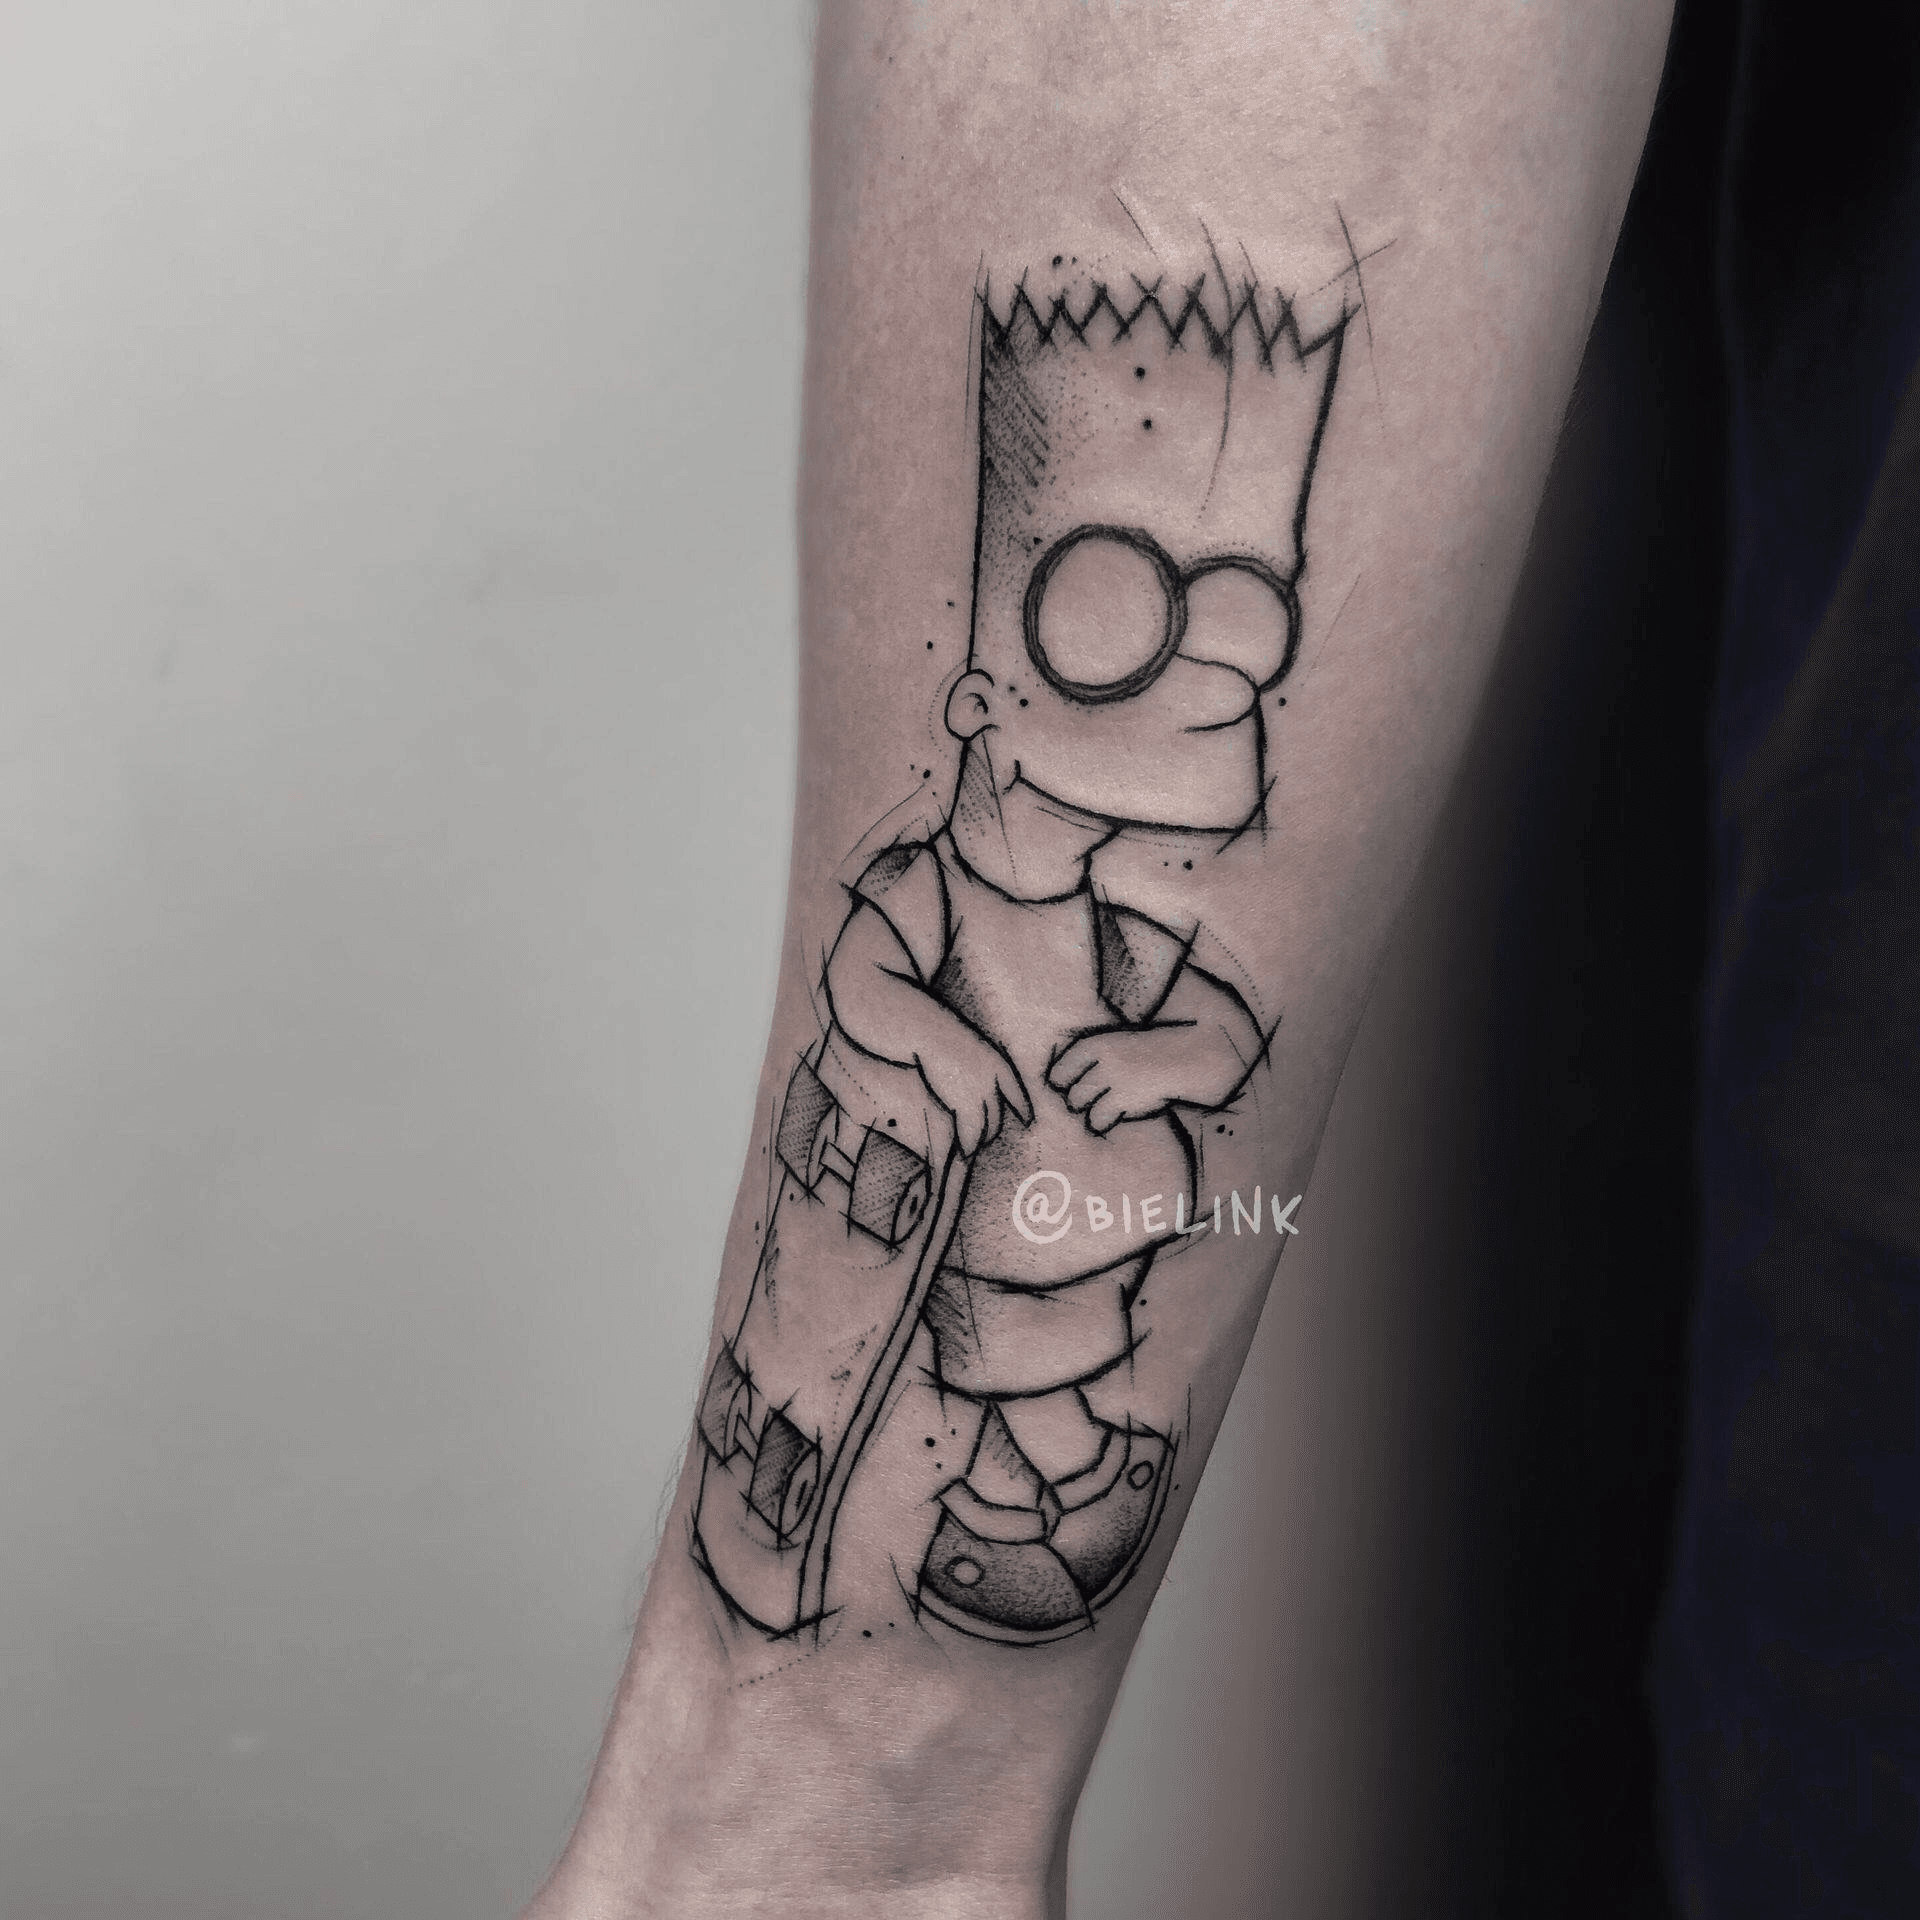 Turning The Simpsons Characters Into Hypebeasts  This artist gave The  Simpsons characters a major transformation  wait until you see Barts face  tattoos   By UNILAD Entertainment  Facebook